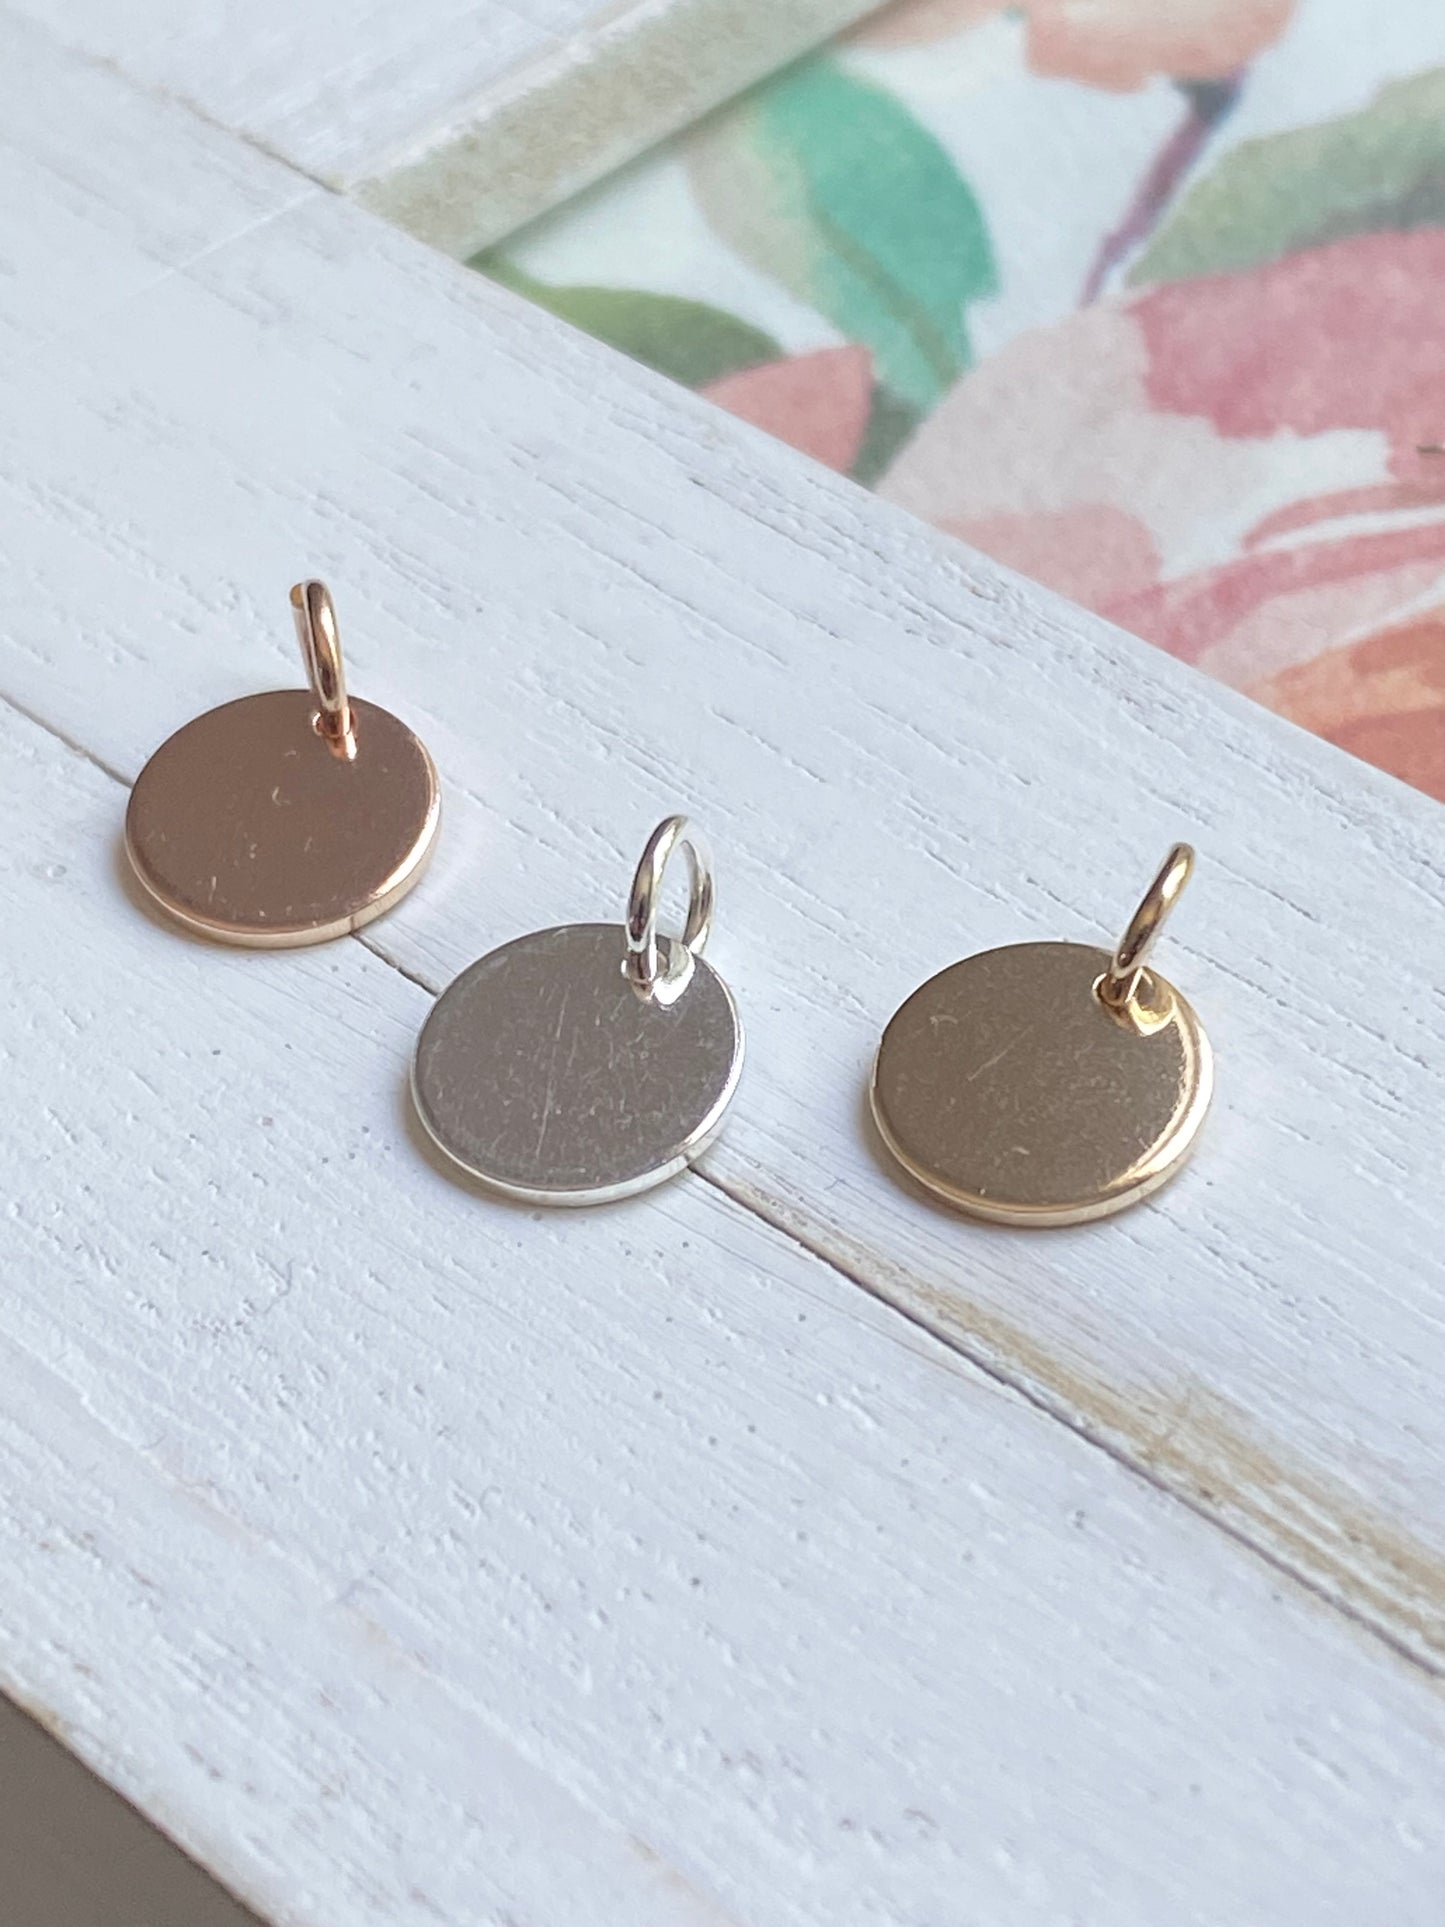 Disc Charms Metal Circle Pendants Sterling Rose Gold Filled Jewelry Component For Earrings or Necklaces